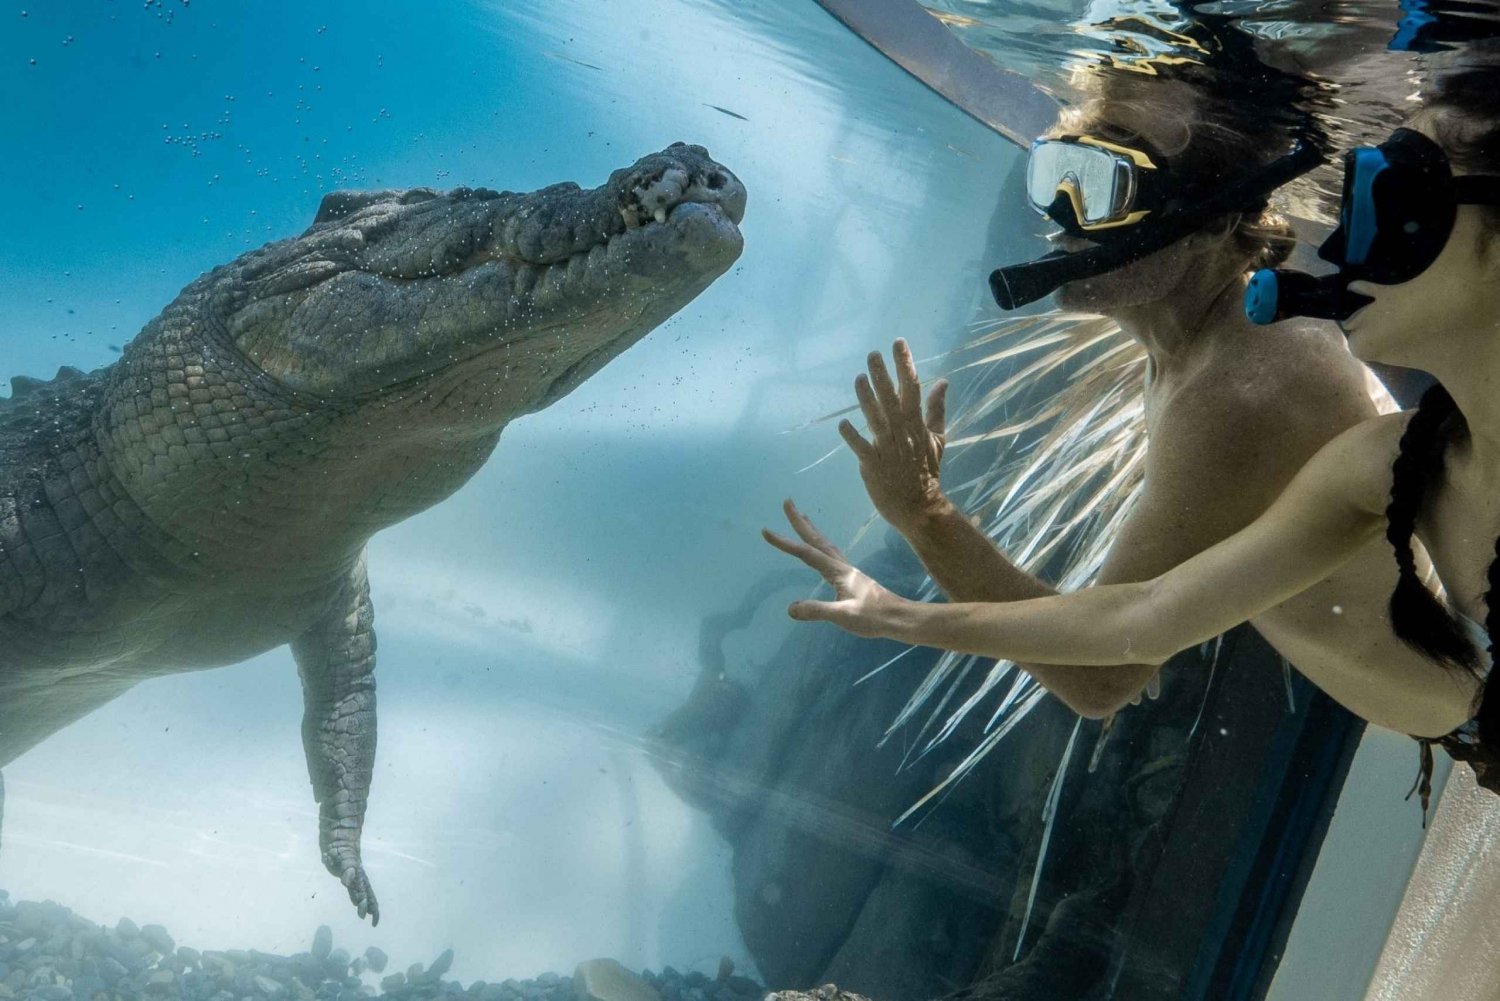 Get-up-Close-and-Personal-with-Crocodiles